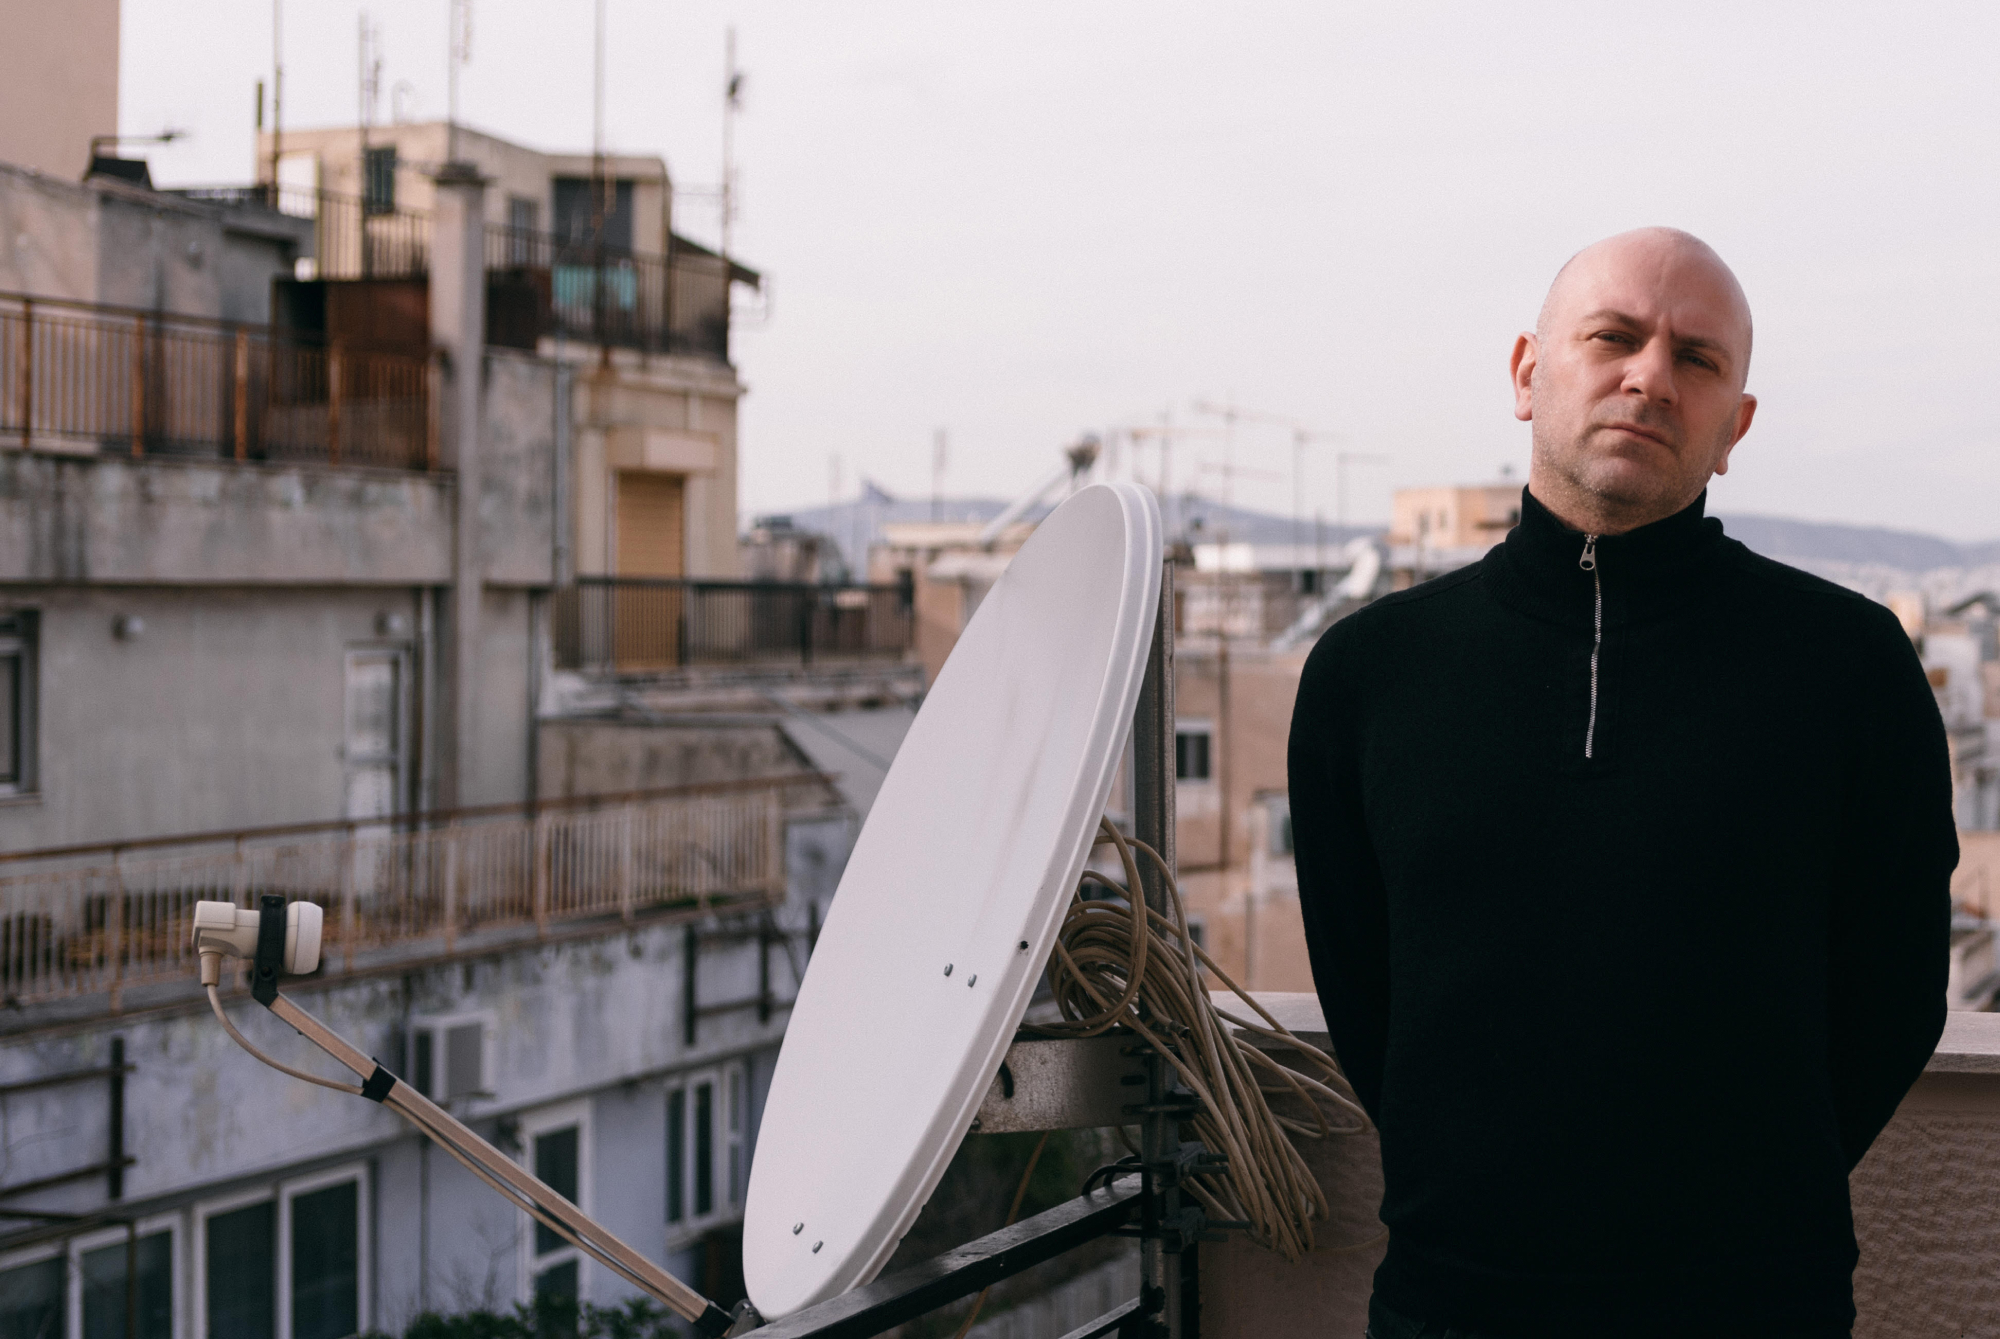 portrait of Voltnoi Brege, co-director of stegi.radio. Photographed on a balcony, next to a satellite dish, with other houses in the background